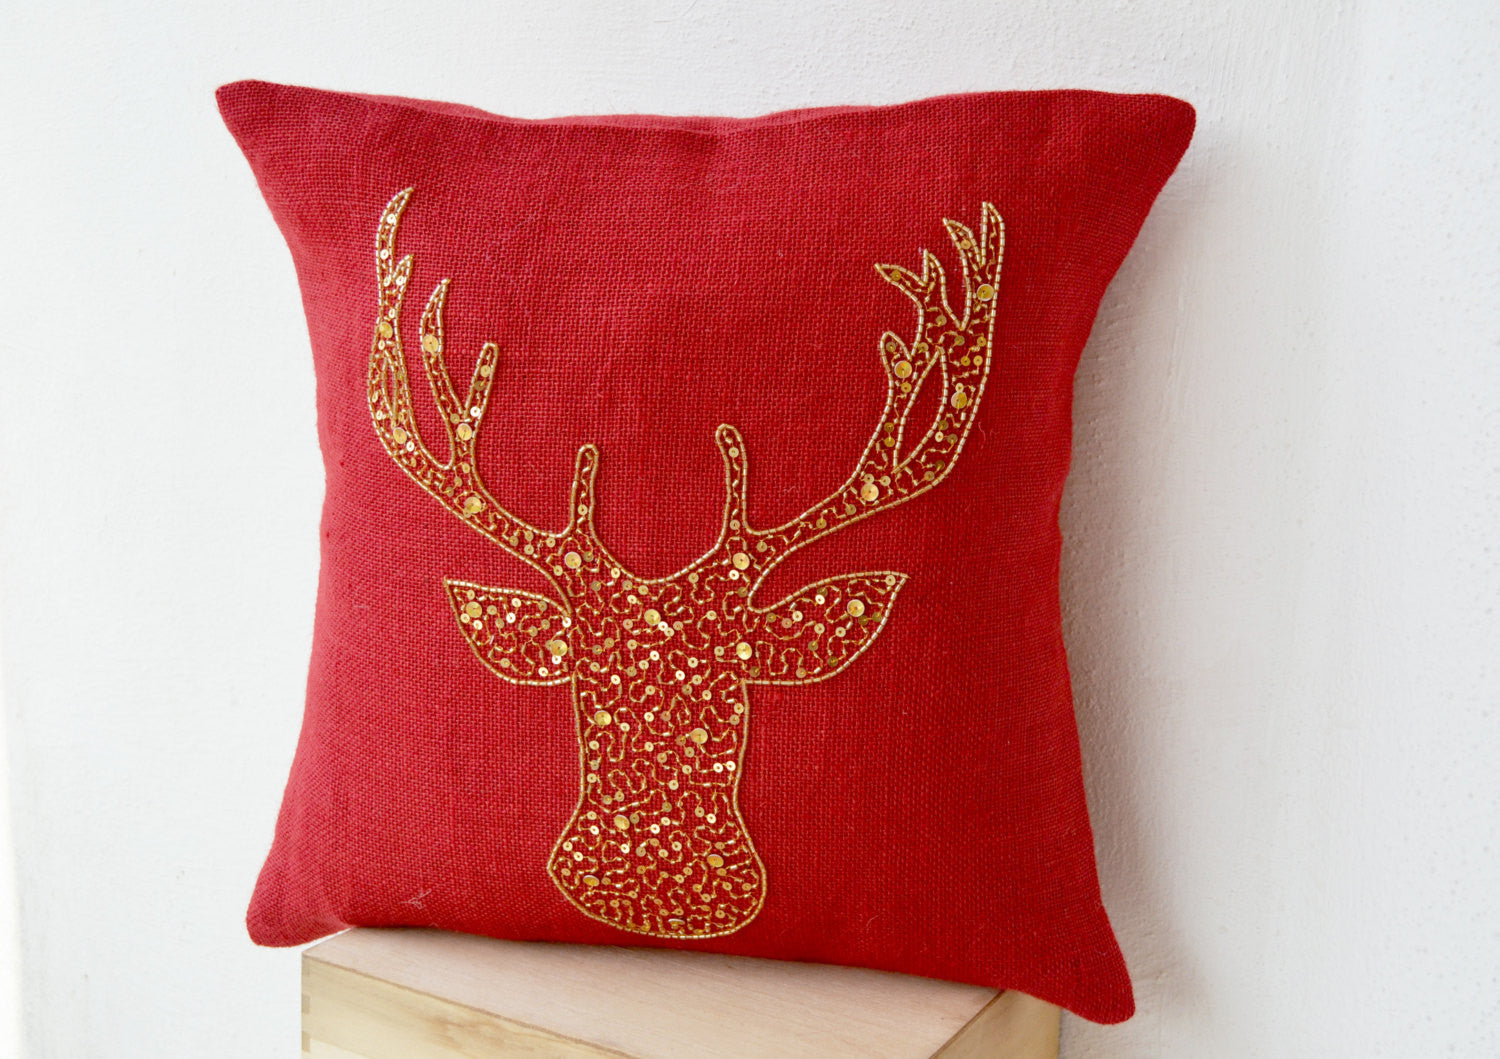 Handmade animal design pillows for Christmas embroidered in gold sequin